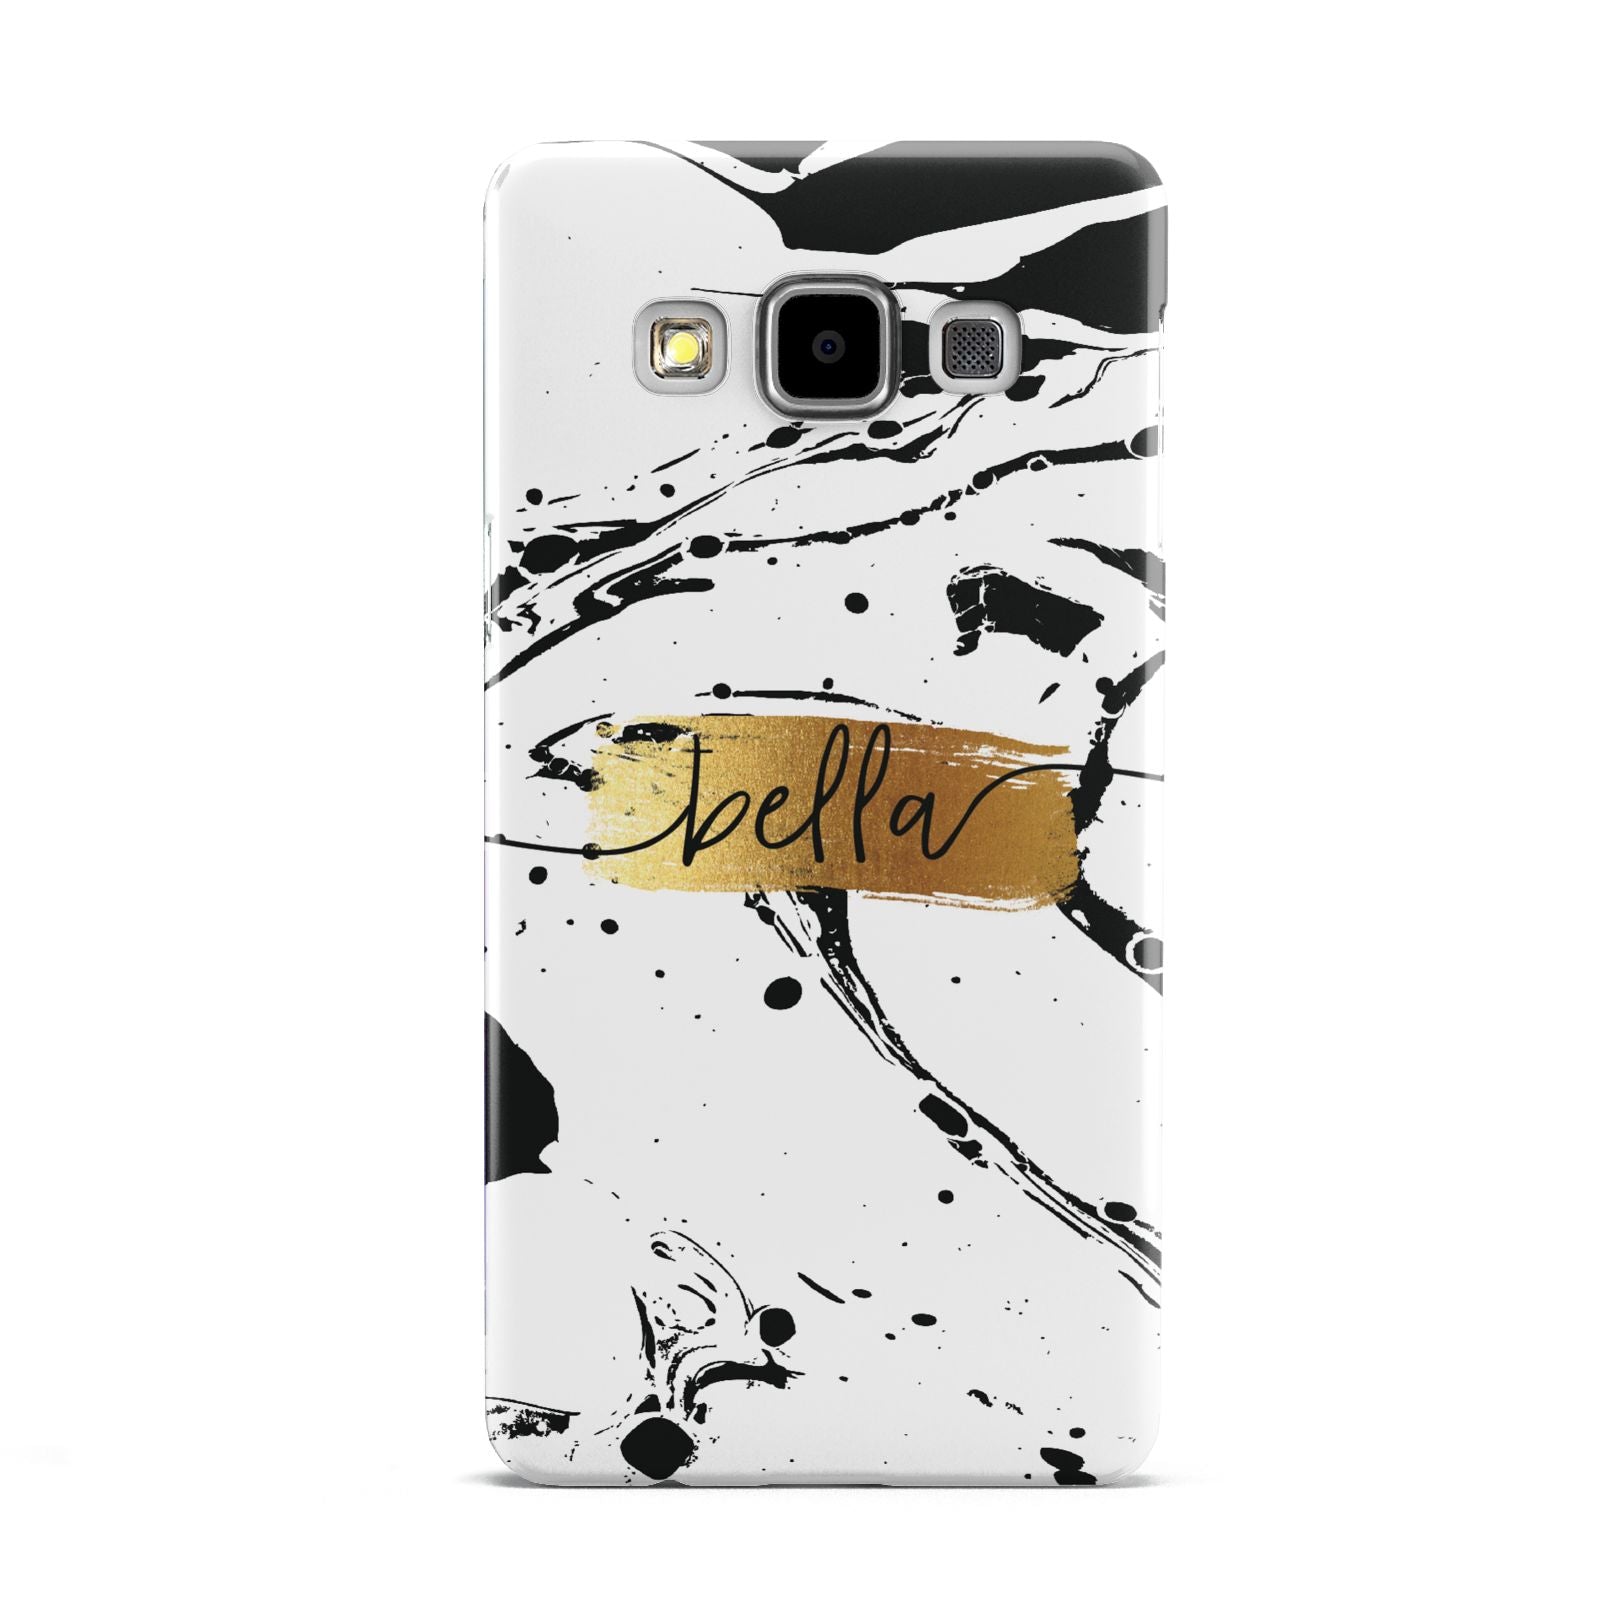 Personalised White Gold Swirl Marble Samsung Galaxy A5 Case